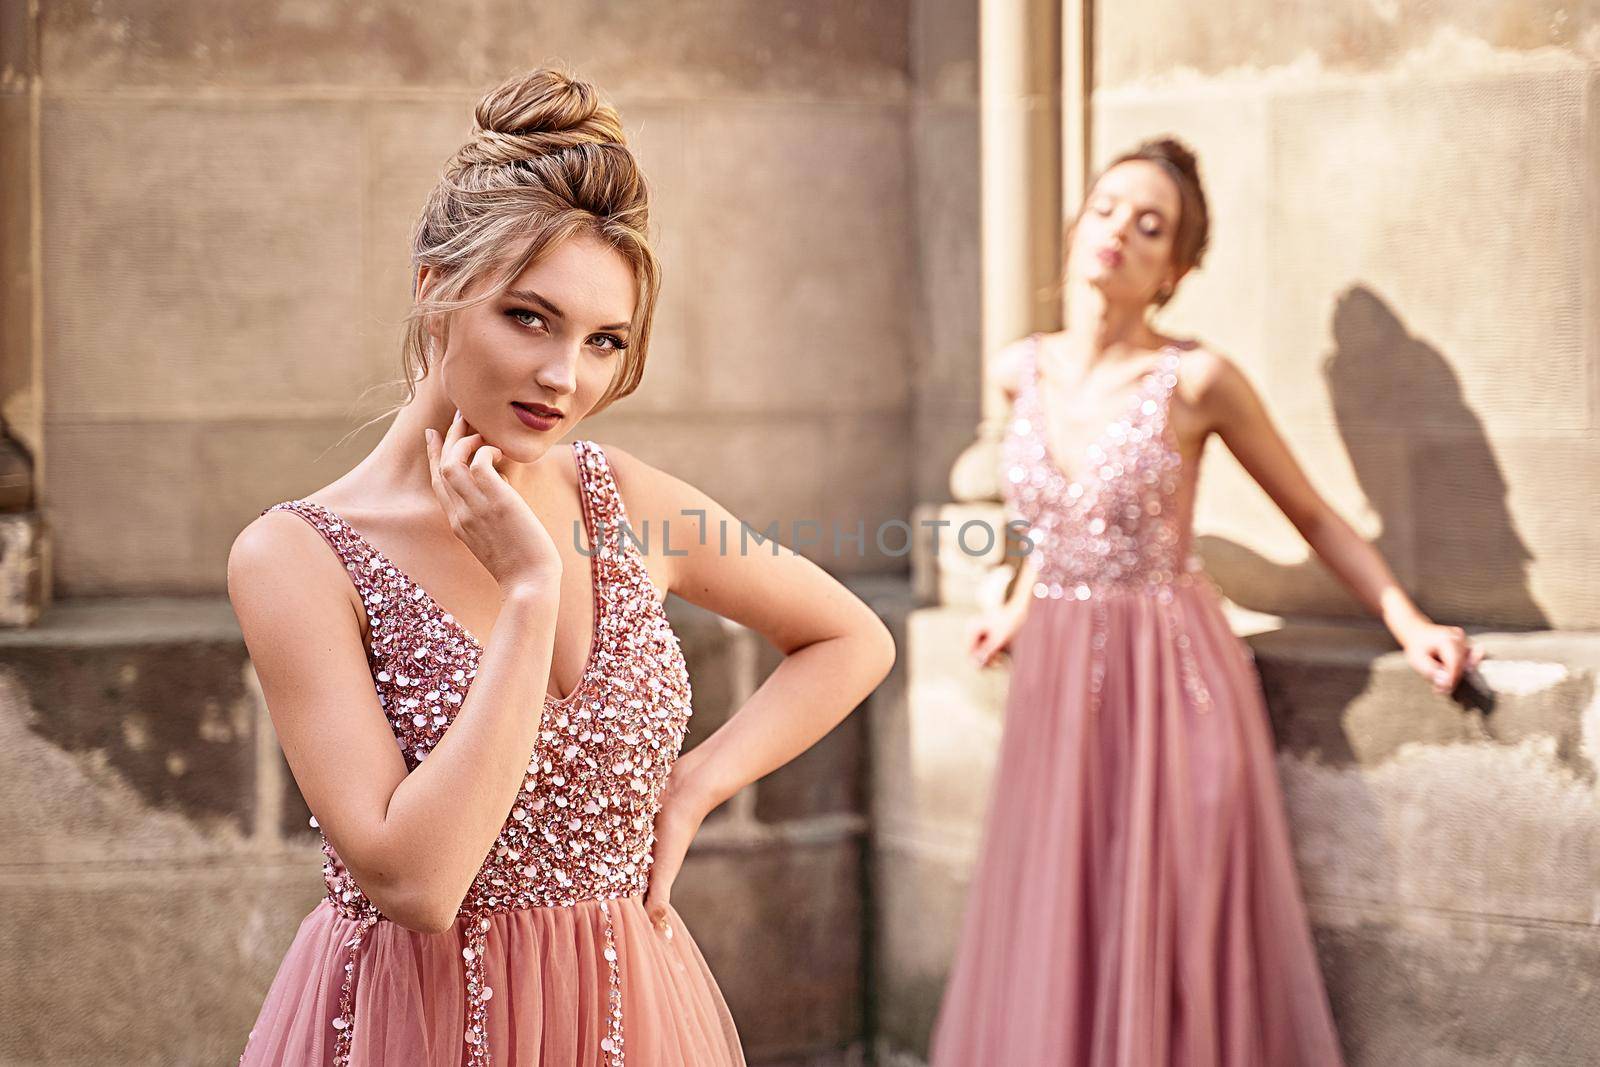 Beautiful bridesmaids in gorgeous elegant stylish red pink violet floor length v neck chiffon gown dress decorated with sequins sparkles and rhinestones holding flowers bouquets. Wedding day in old beautiful European city.